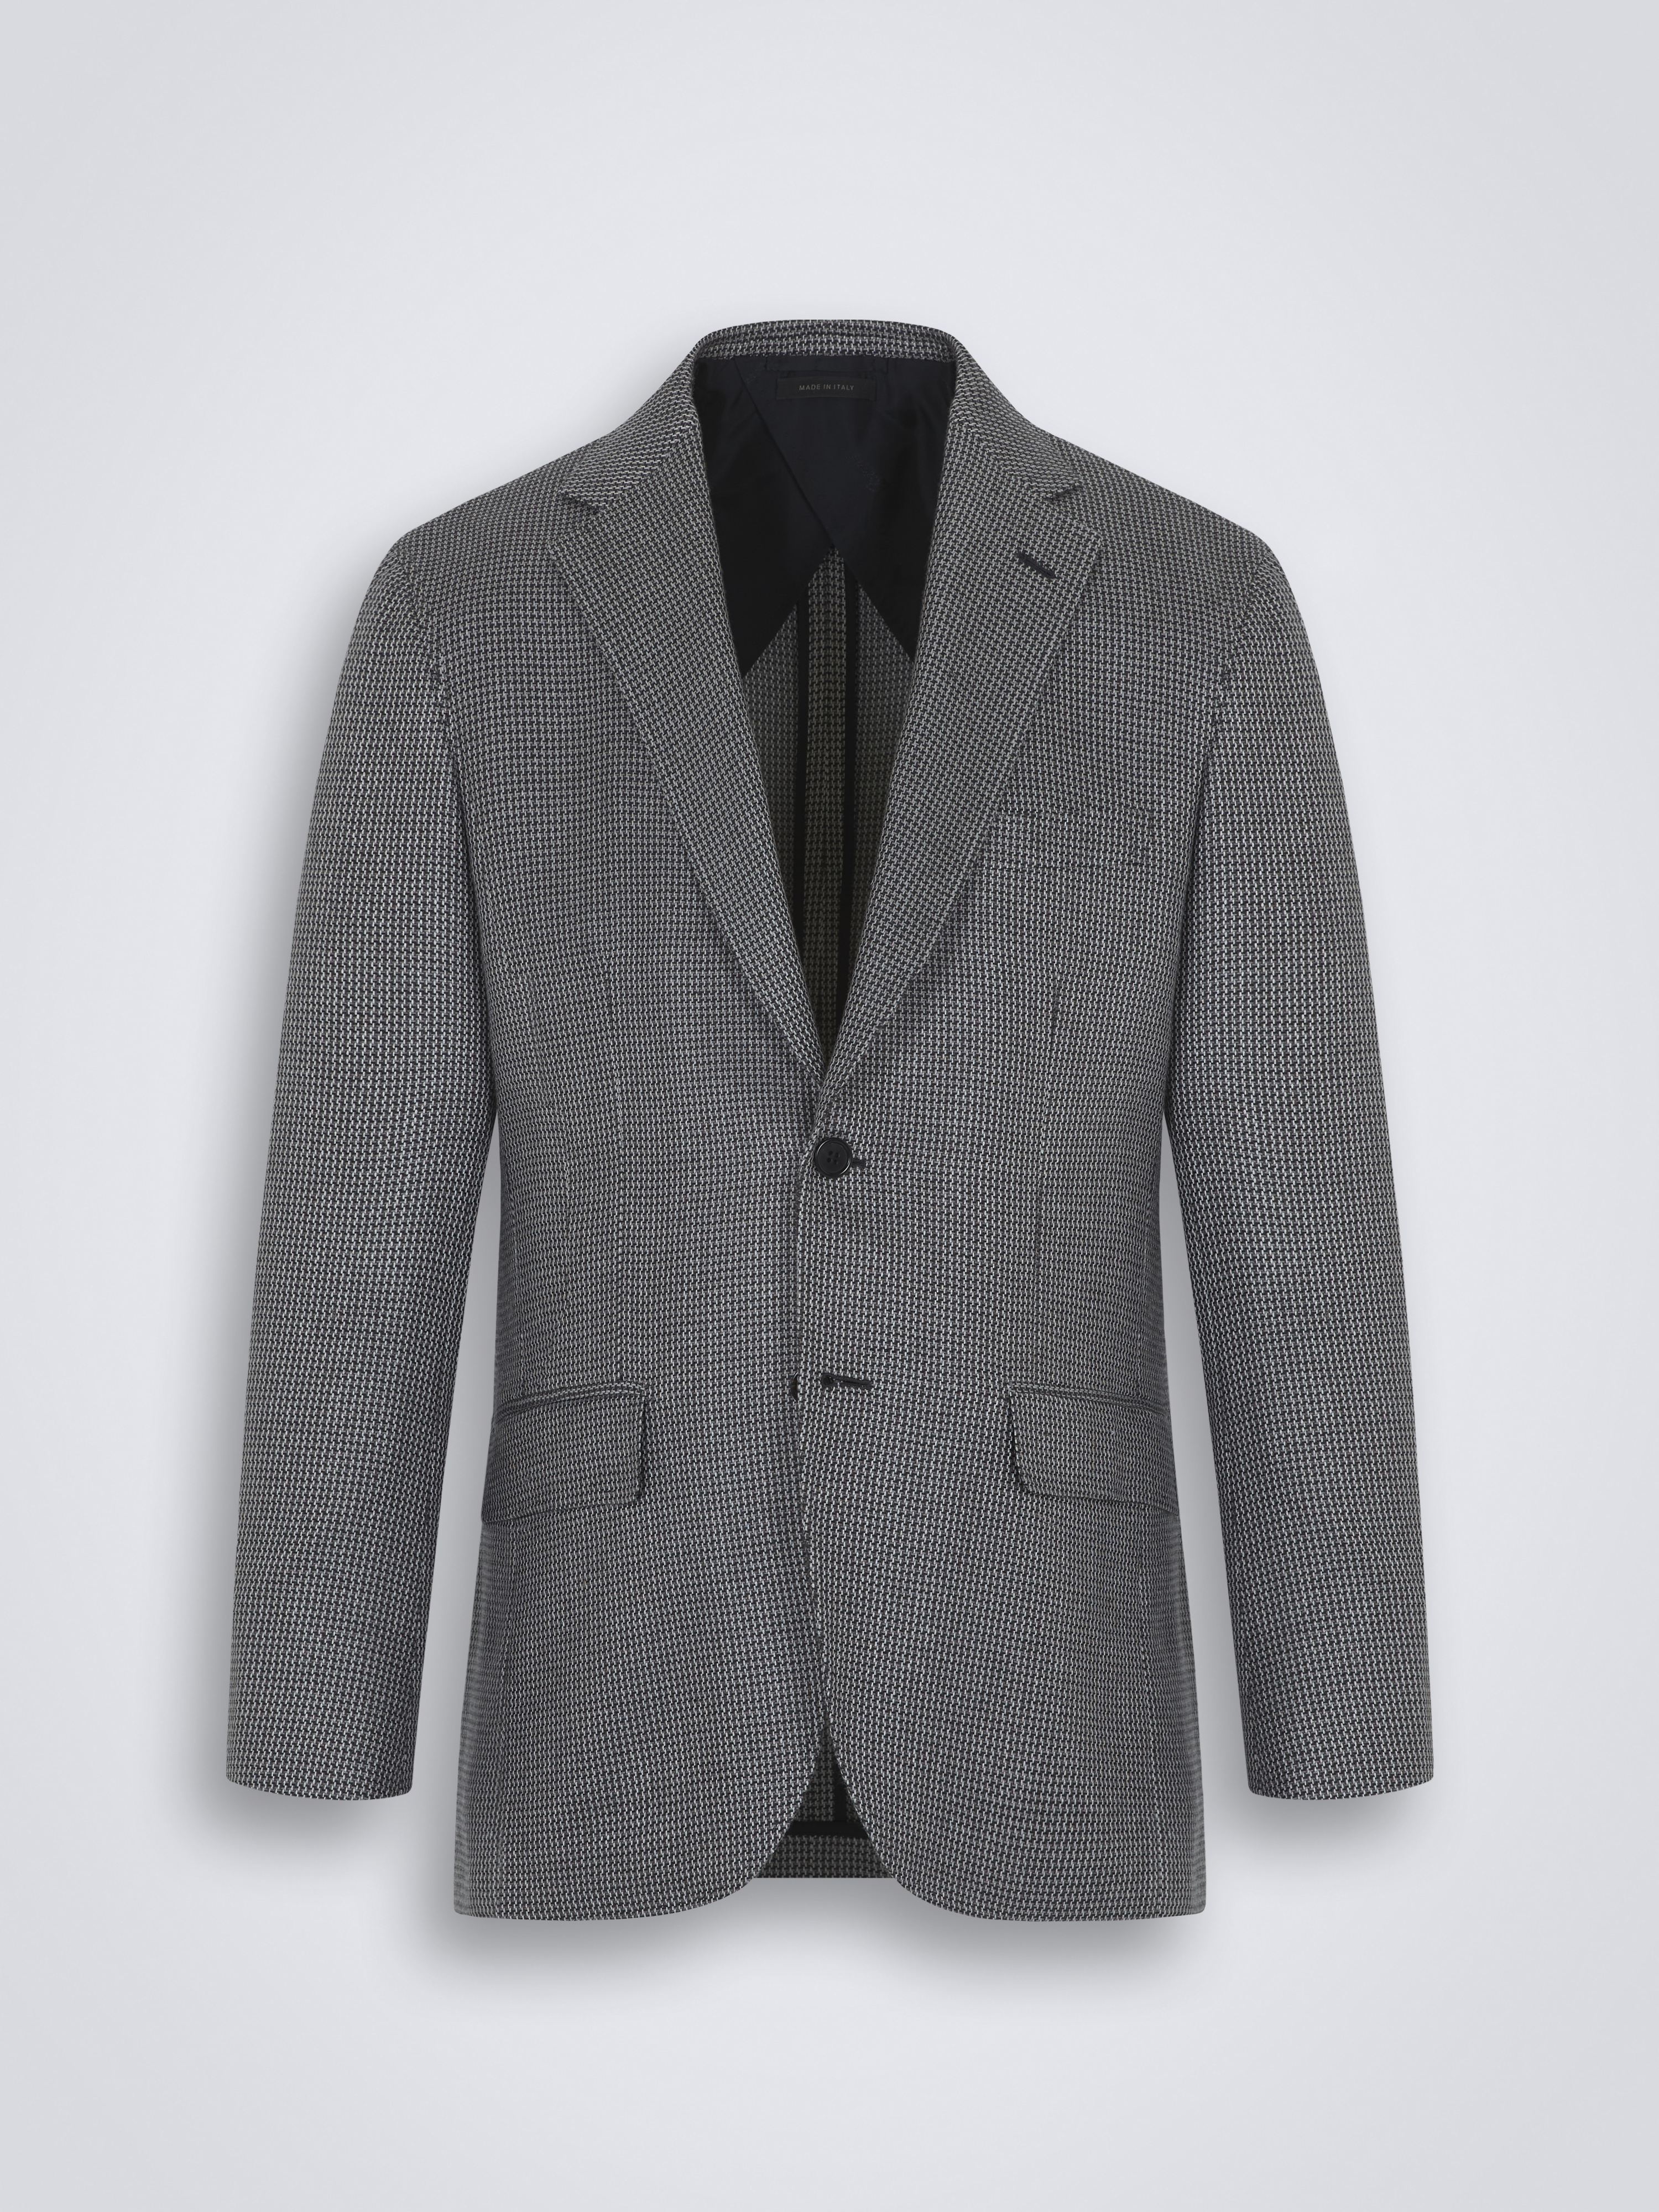 Jackets | Brioni® US Official Store